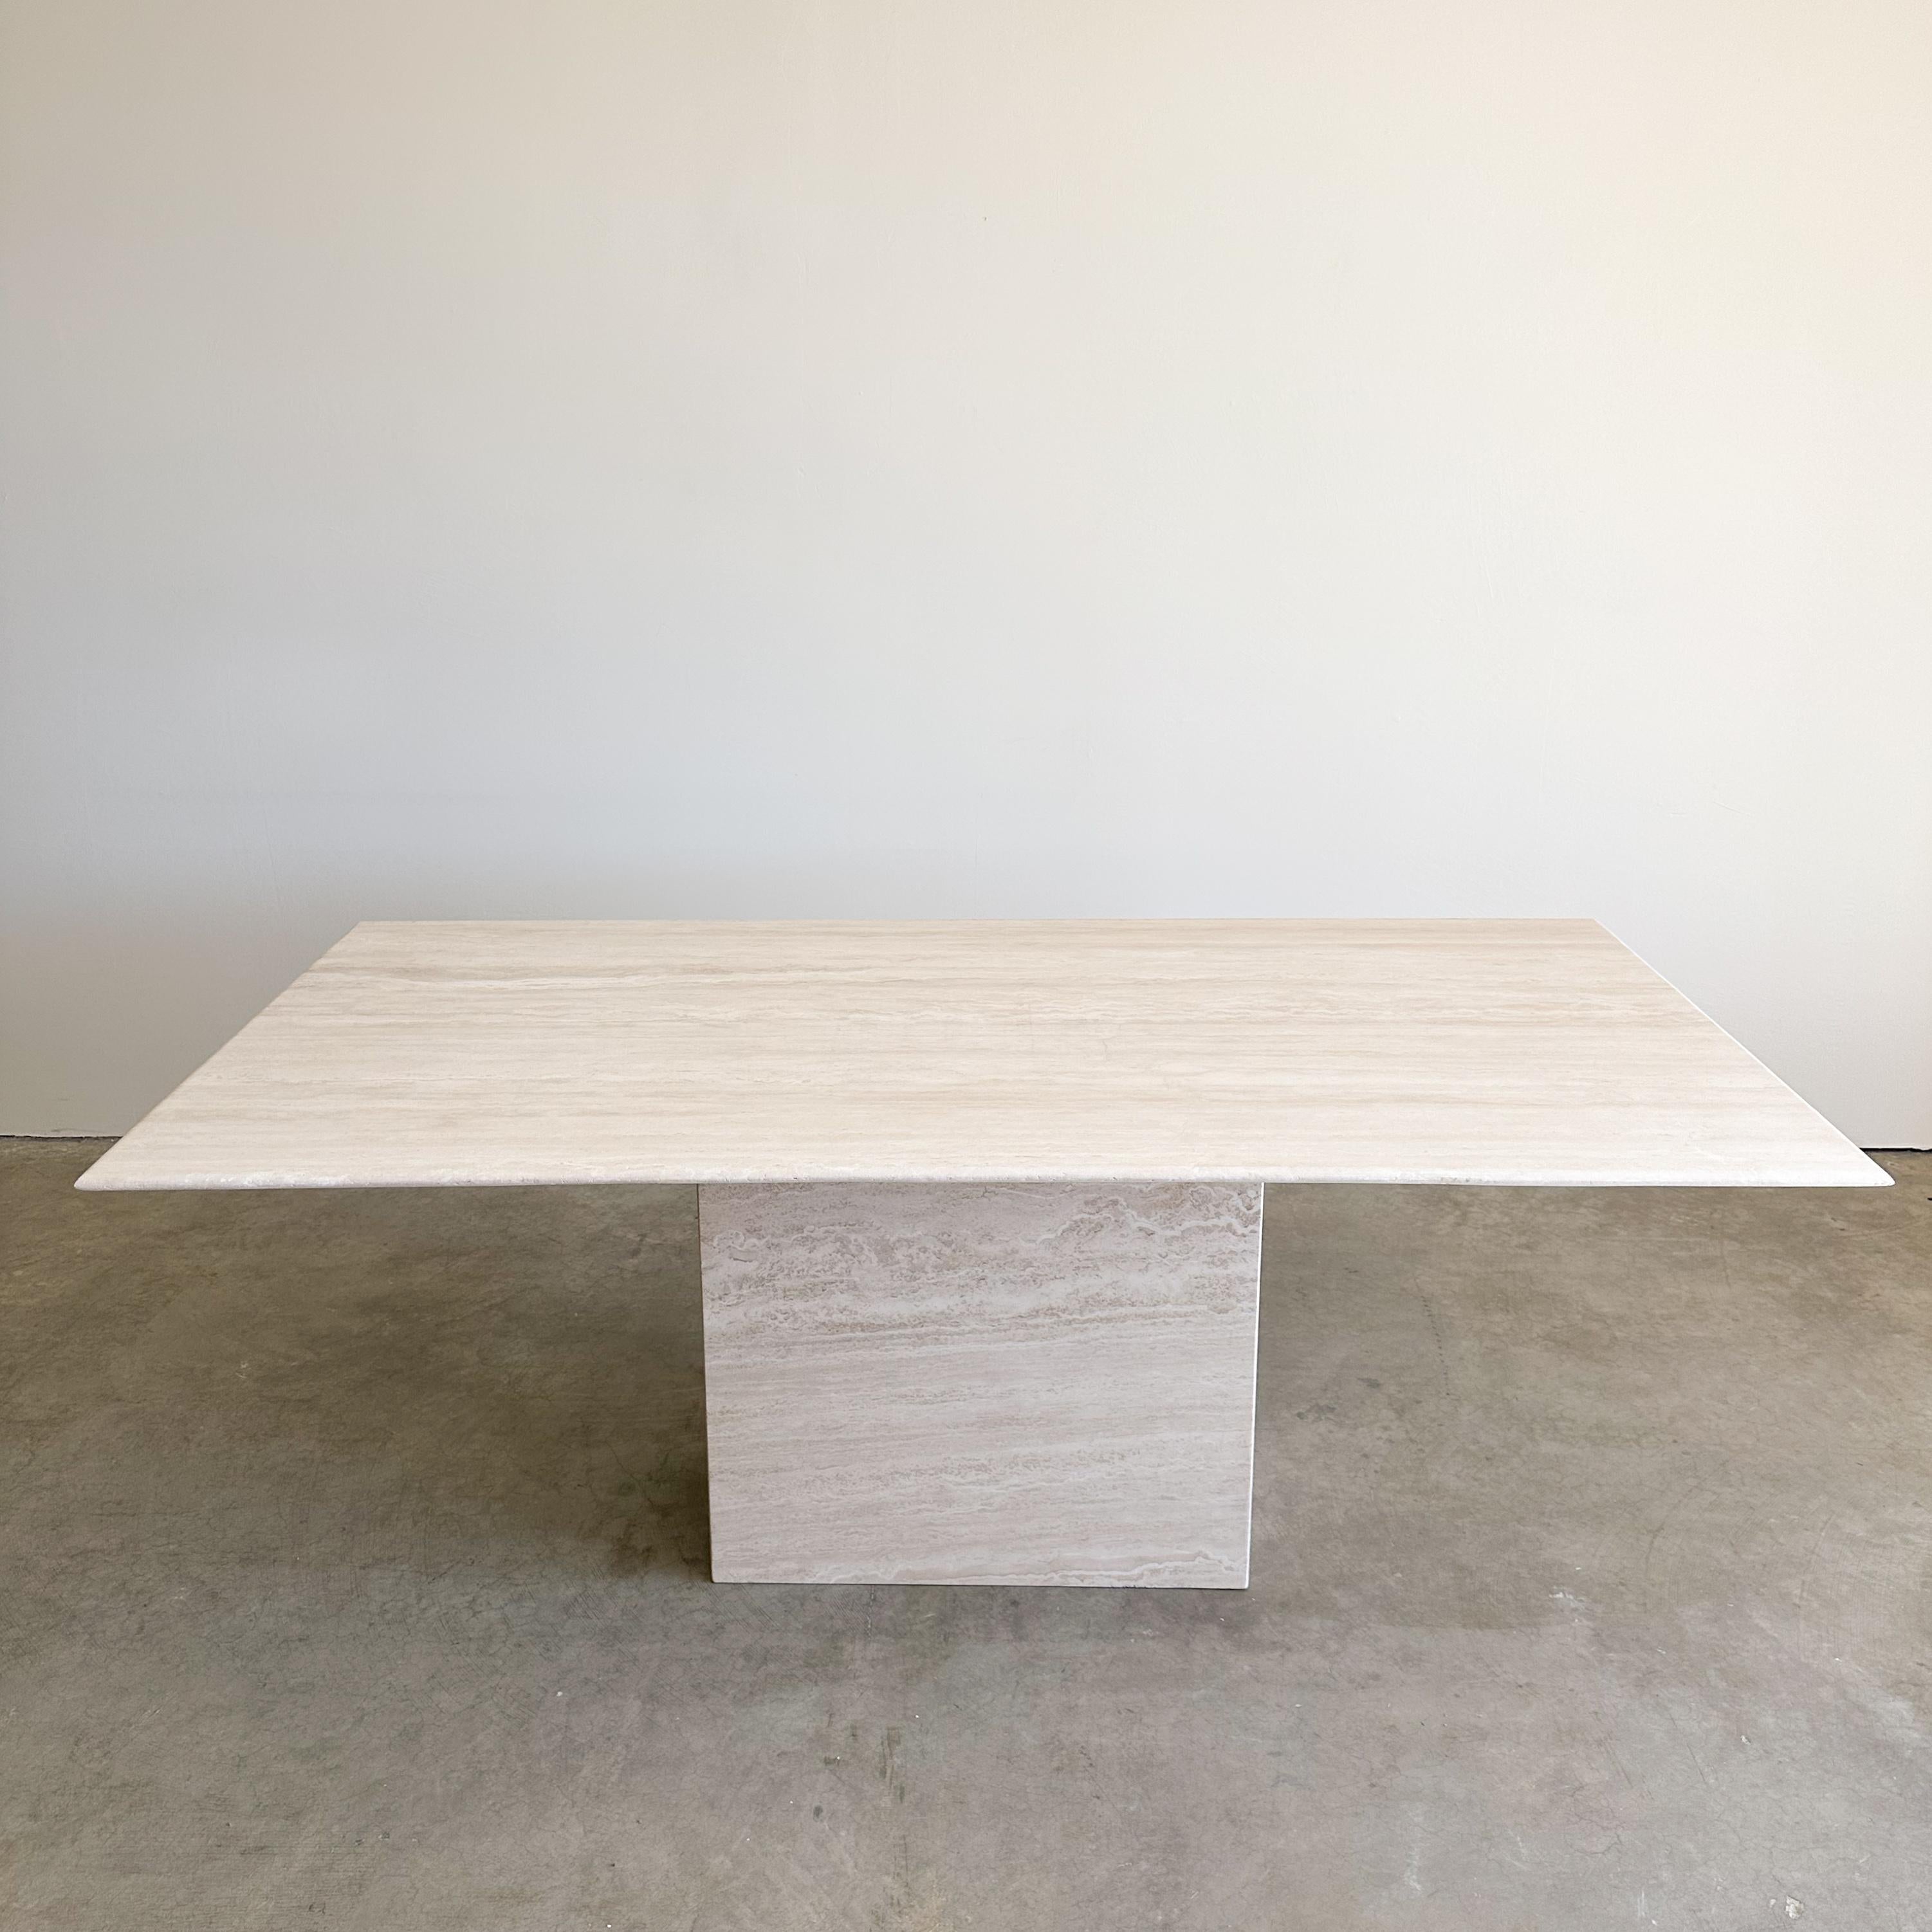 Late 20th Century Vintage Travertine Stone Rectangle Dining Table 